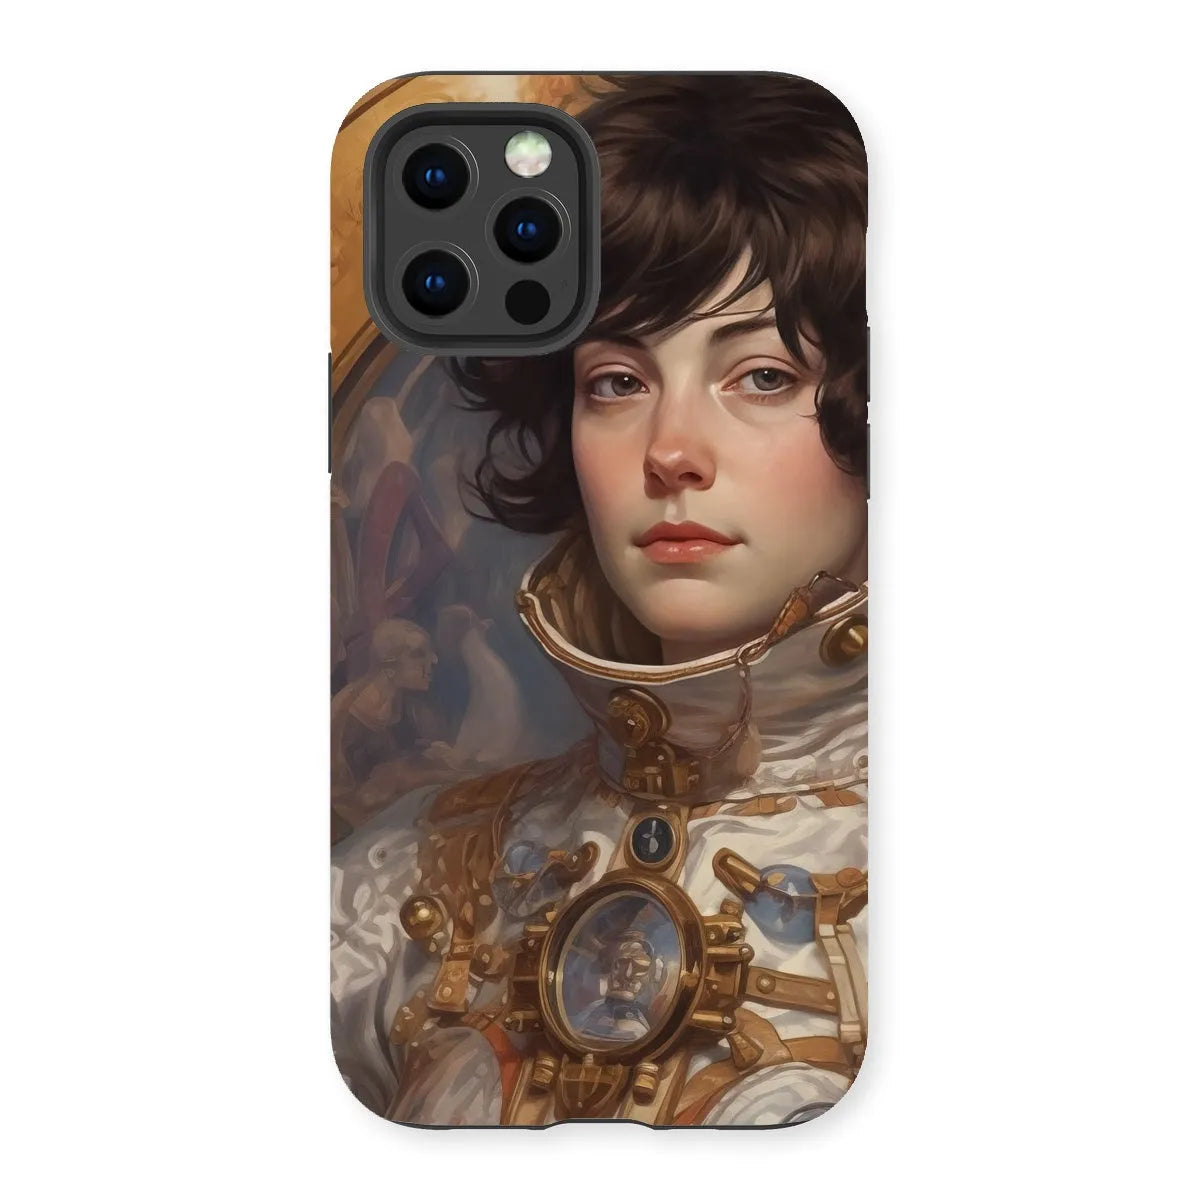 Chloé The Lesbian Astronaut - Space Aesthetic Art Phone Case - Iphone 13 Pro / Matte - Mobile Phone Cases - Aesthetic